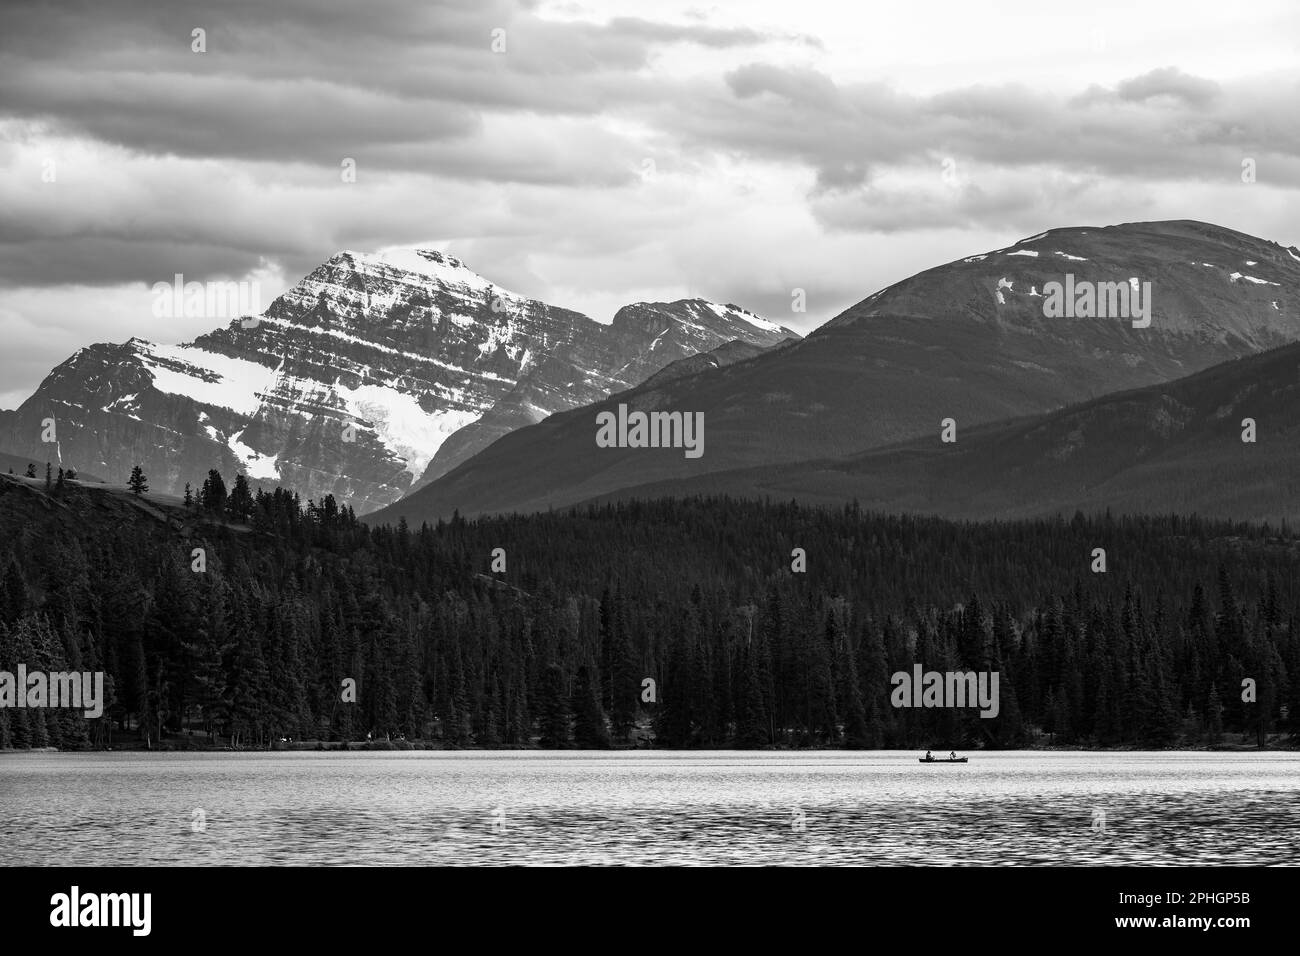 Lake Beauvert in black and white with people kayaking and Mount Edith Cavell, Jasper national park, Canada. Stock Photo